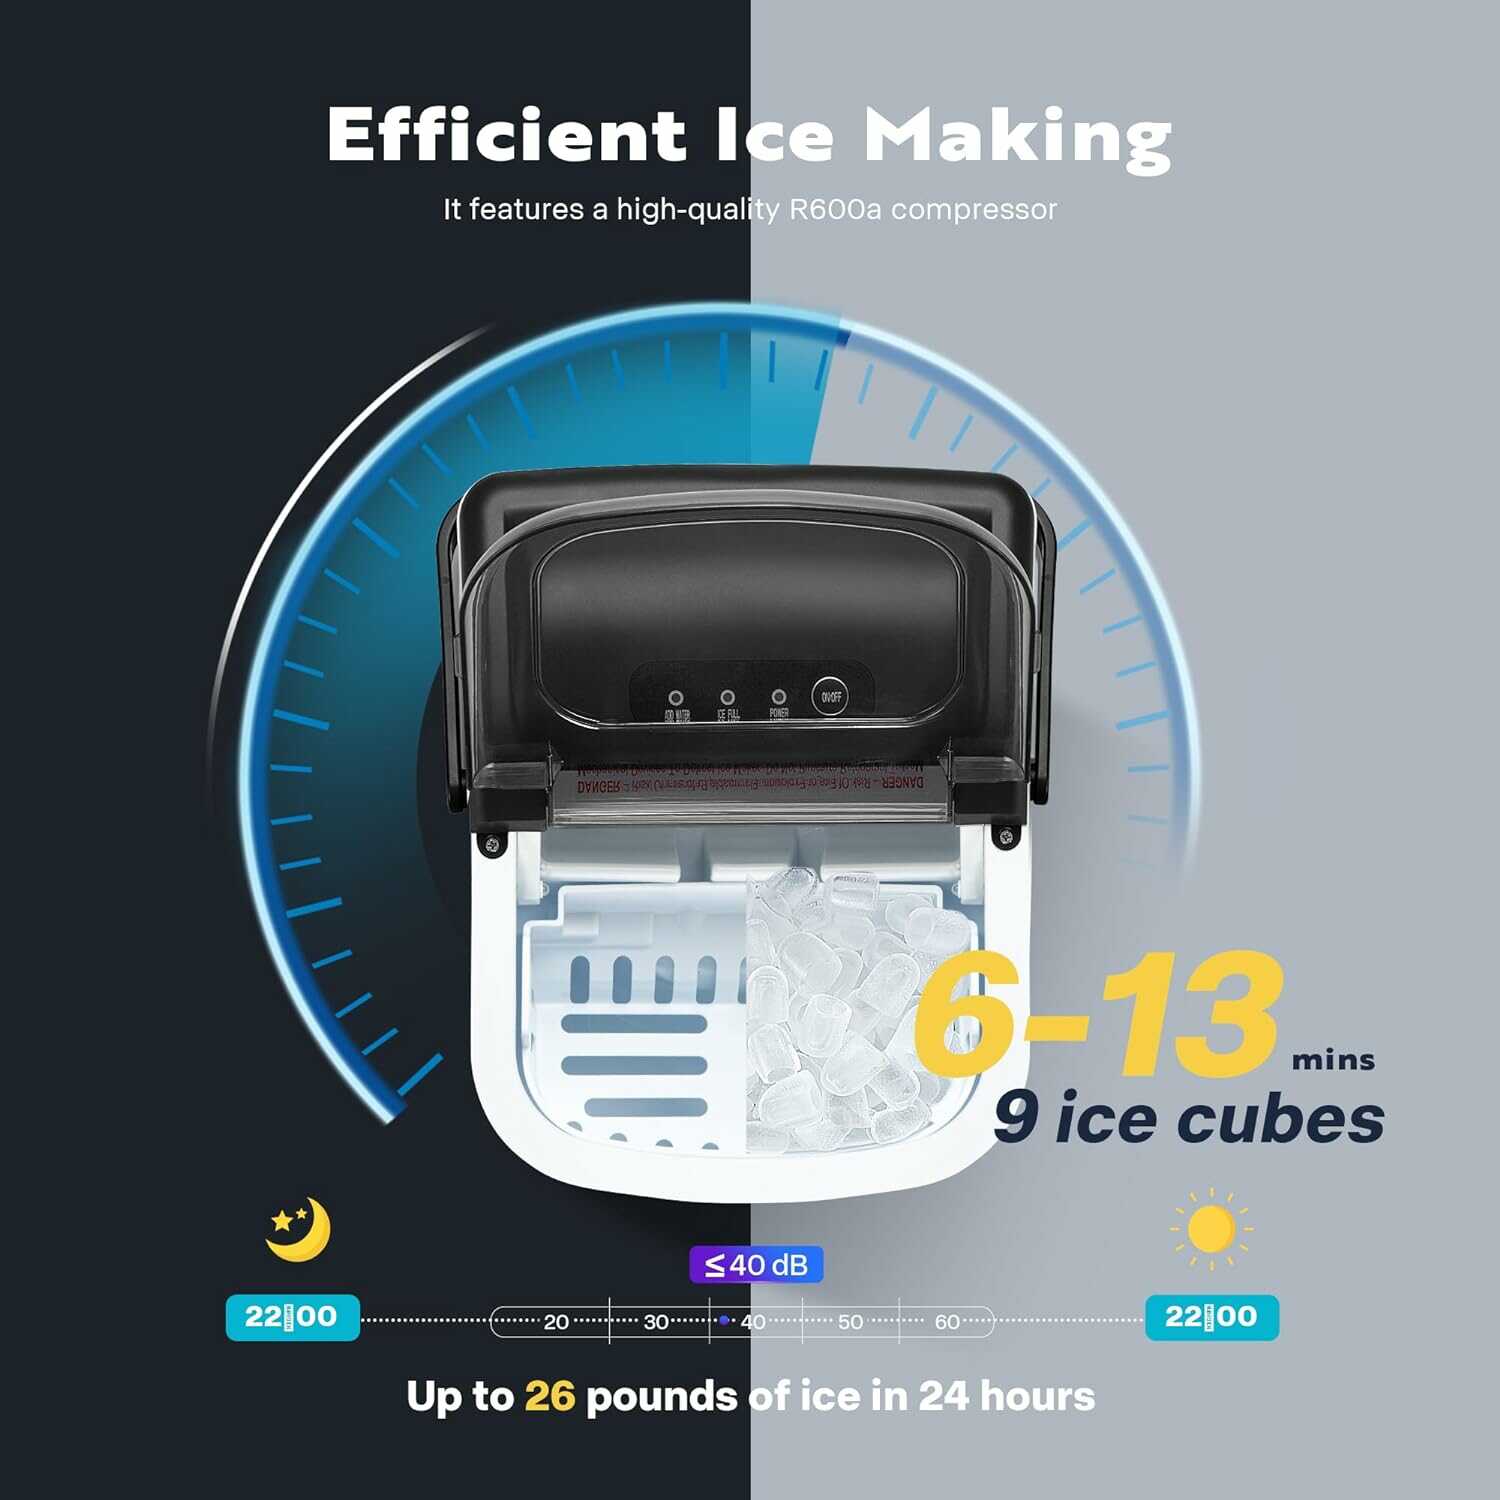 VIVOHOME Countertop Automatic Ice Maker Machine 26lbs/Day